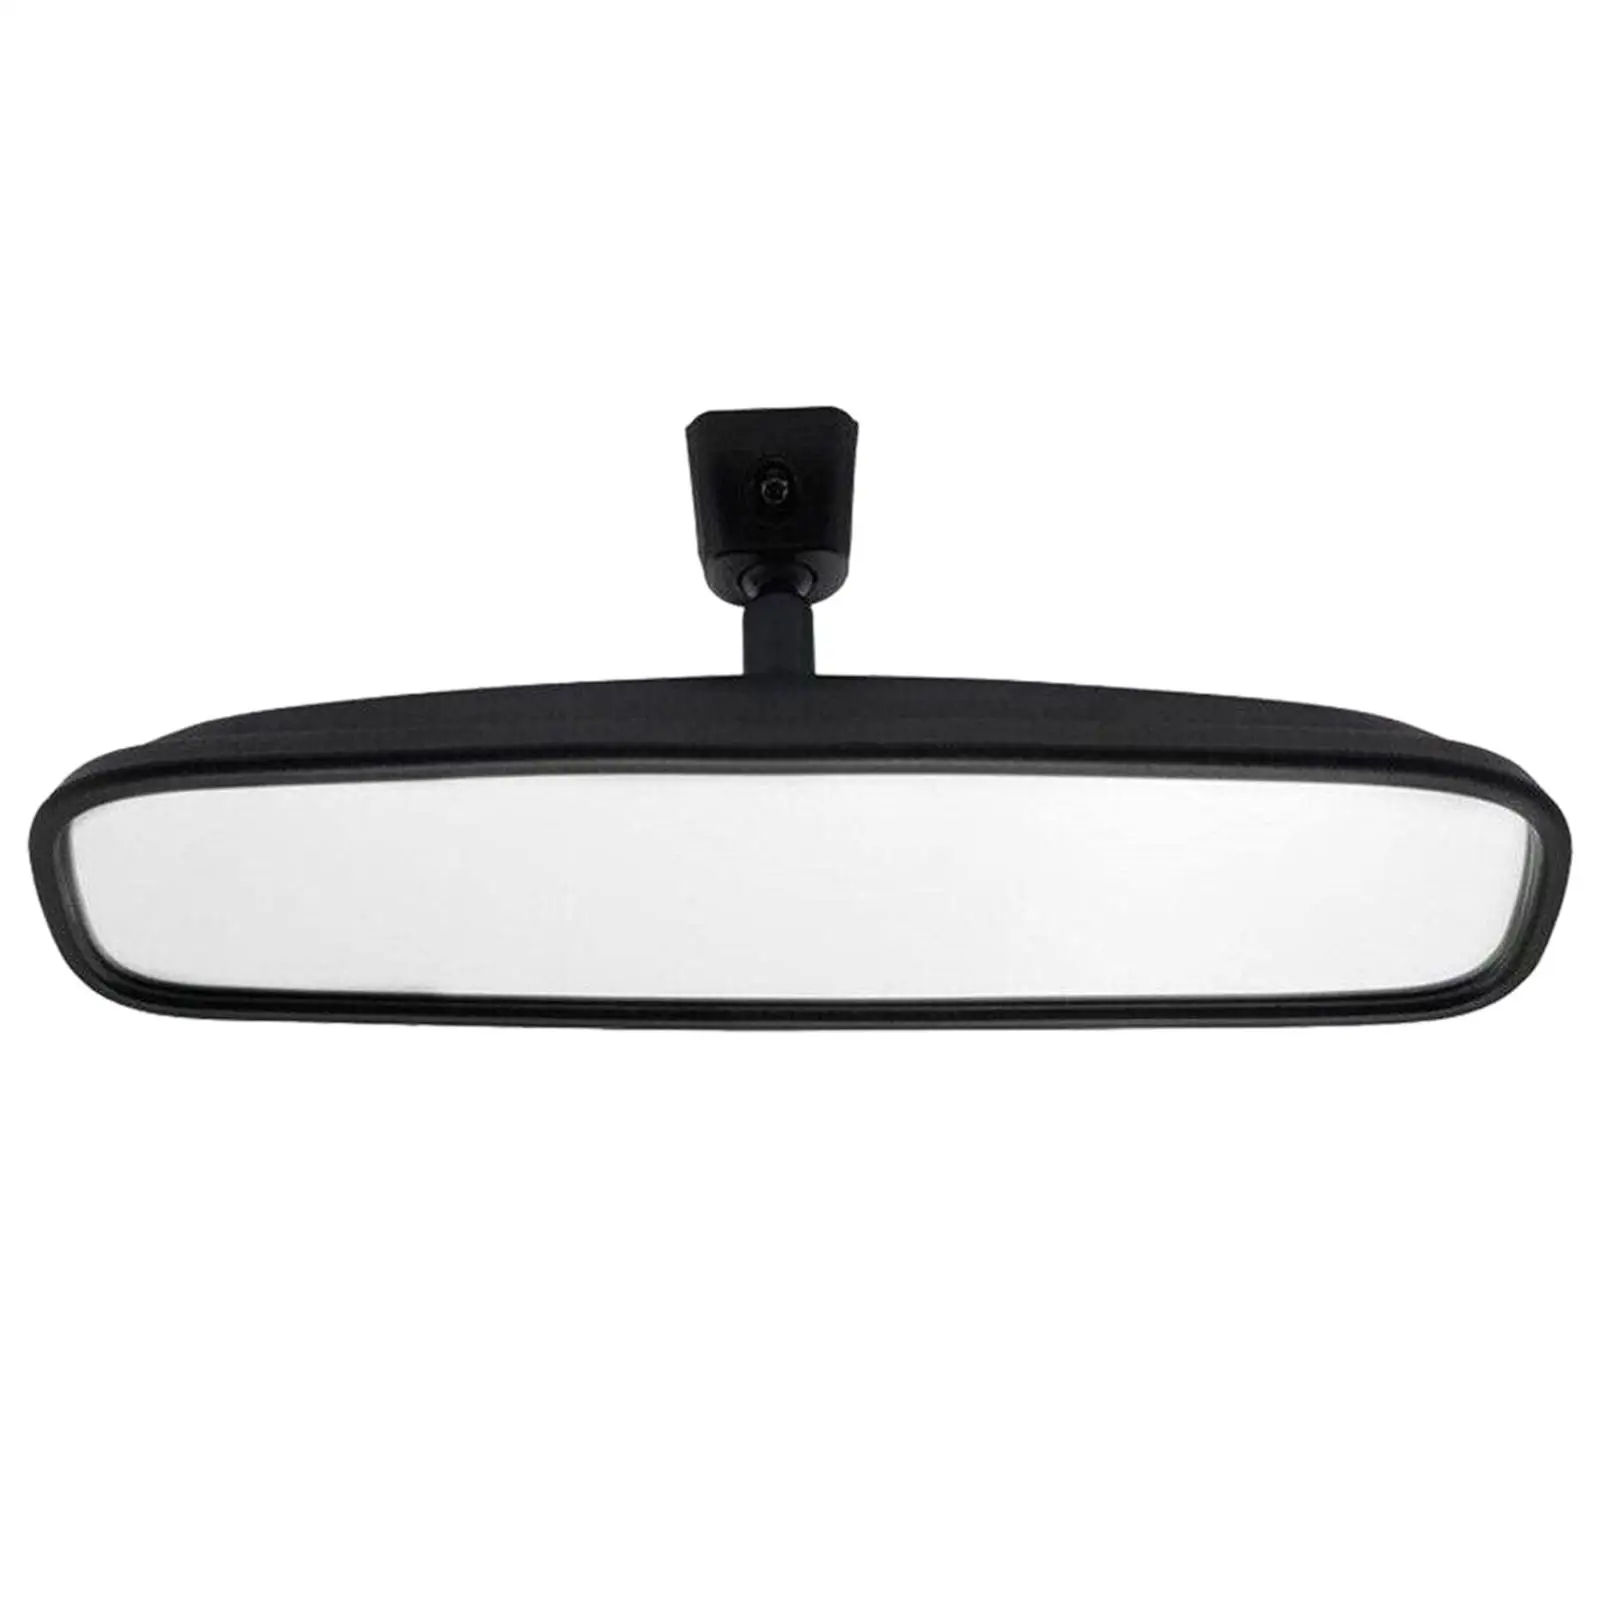 Inside Rear View Mirror 85101-3x100 for Hyundai Veloster 1.6L